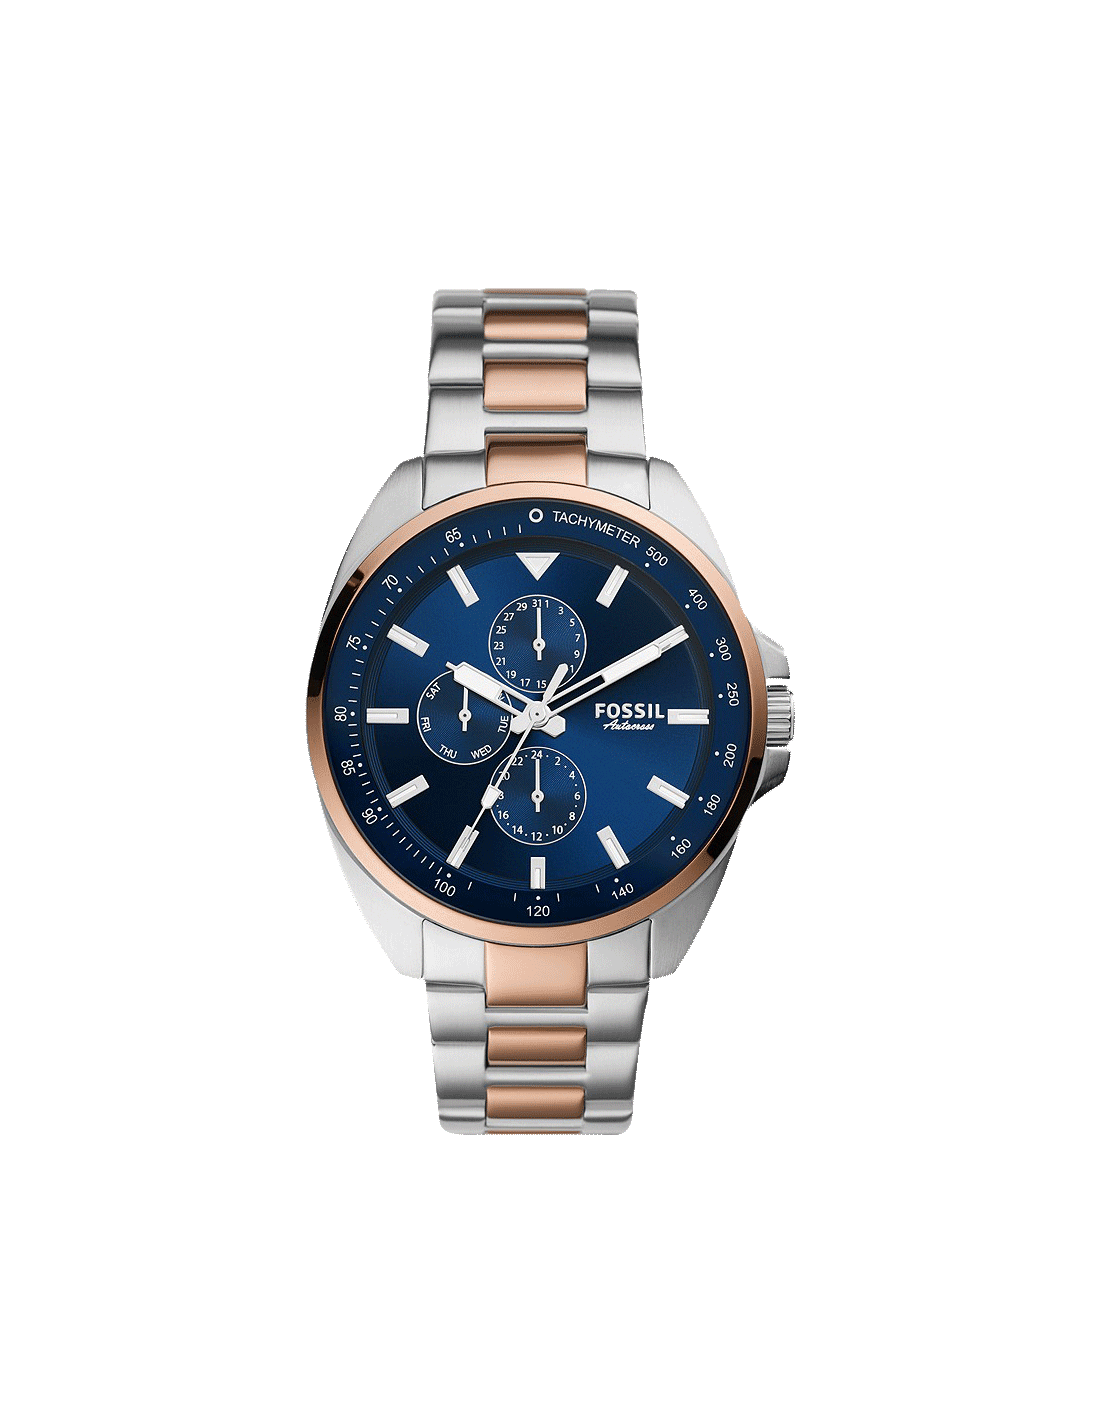 Fossil | Buy Fossil Watches for Men & Women in India | Swiss Time House